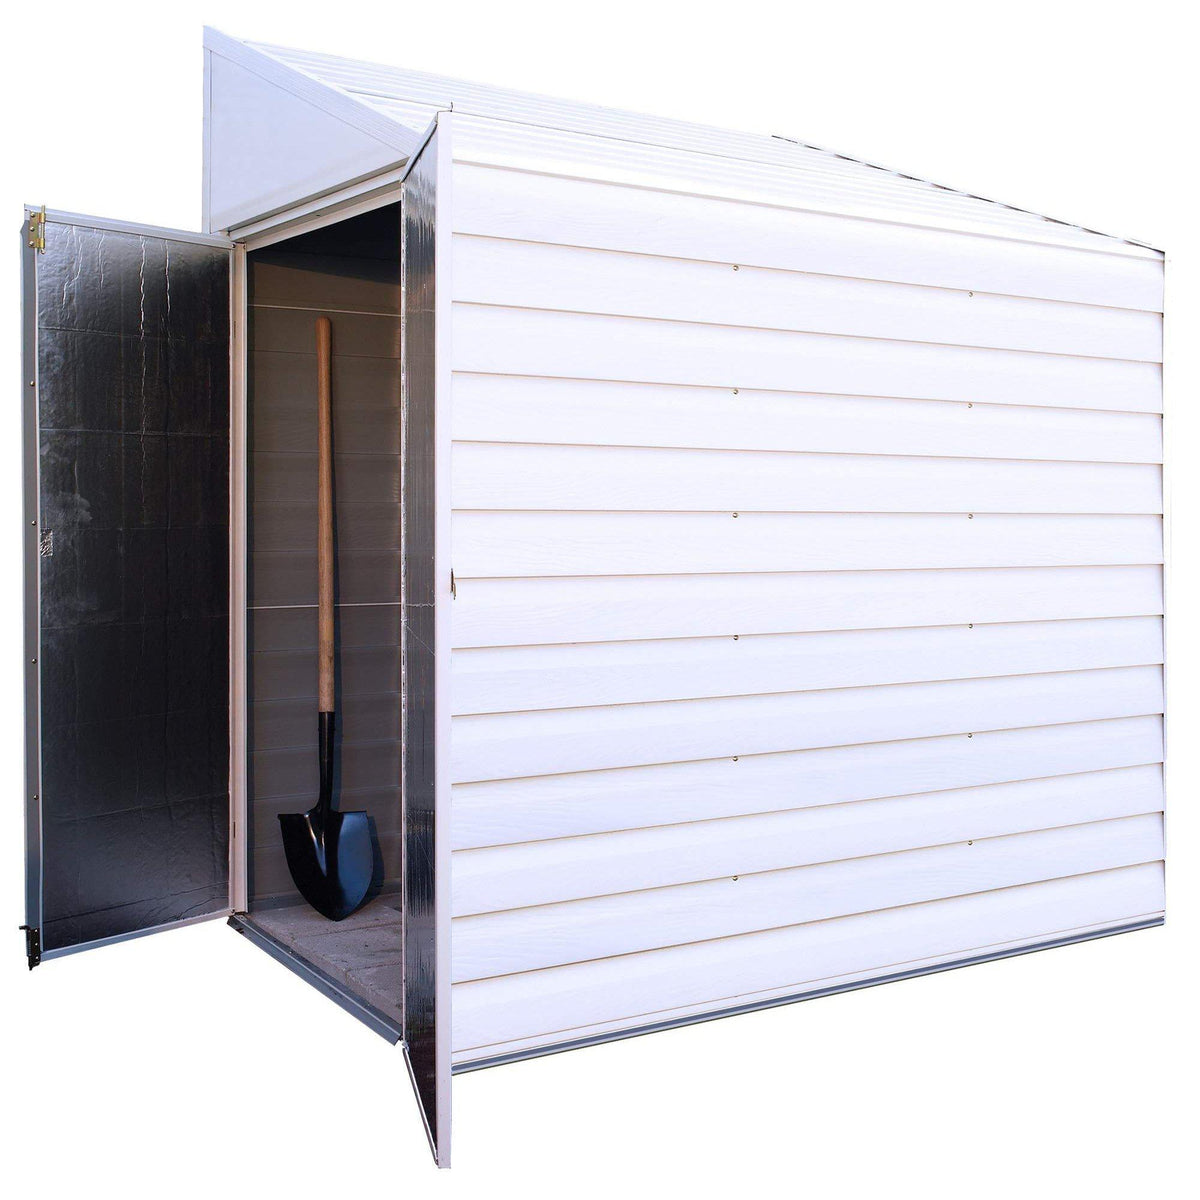 Arrow Yardsaver Compact Galvanized Steel Storage Shed with Pent Roof, 4' x 7'